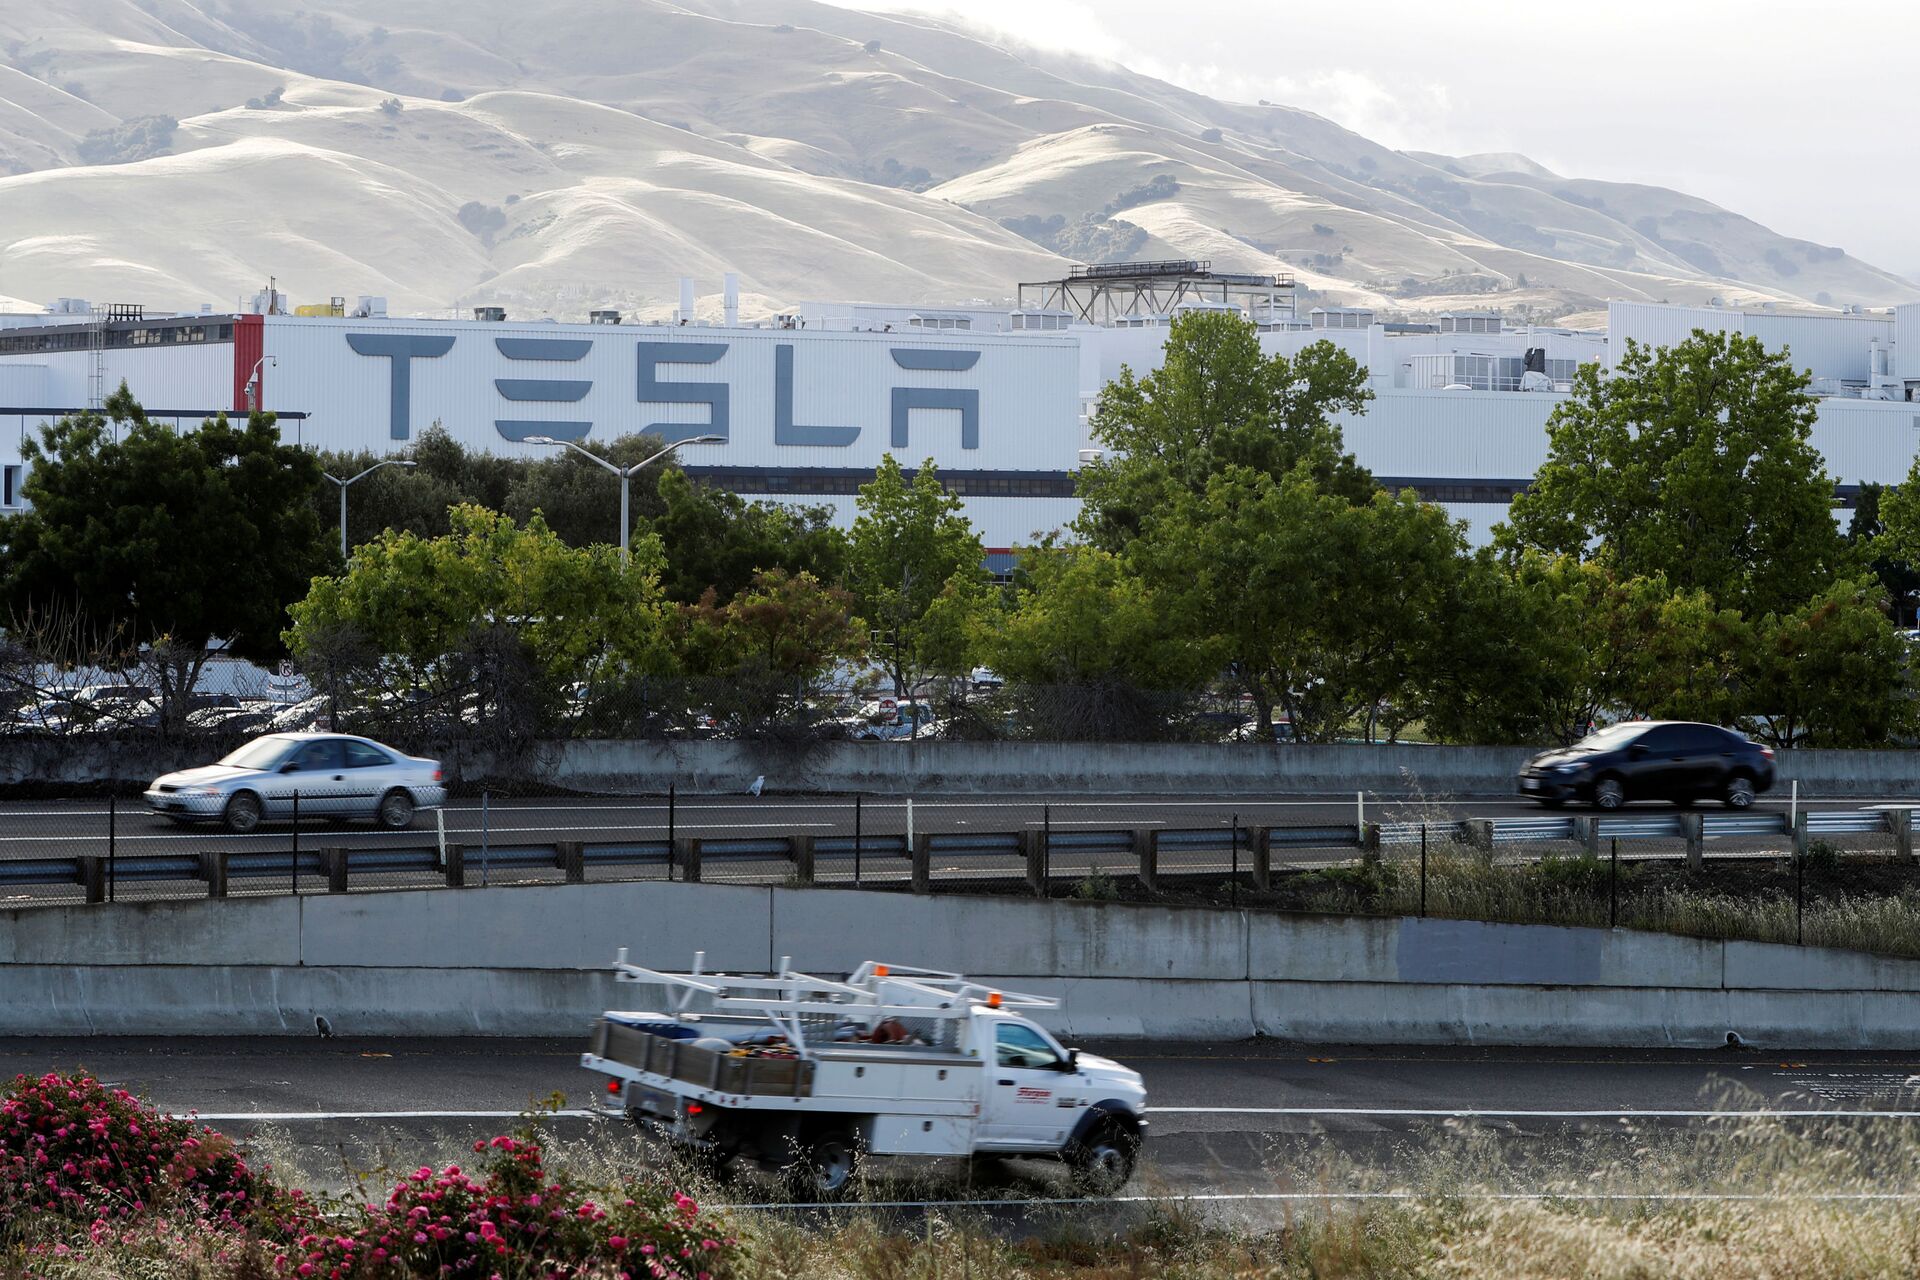 Motorists drive past Tesla's primary vehicle factory after CEO Elon Musk announced he was defying local officials' restrictions against the spread of the coronavirus disease (COVID-19) by reopening the plant in Fremont, California, U.S. May 12, 2020 - Sputnik International, 1920, 07.09.2021